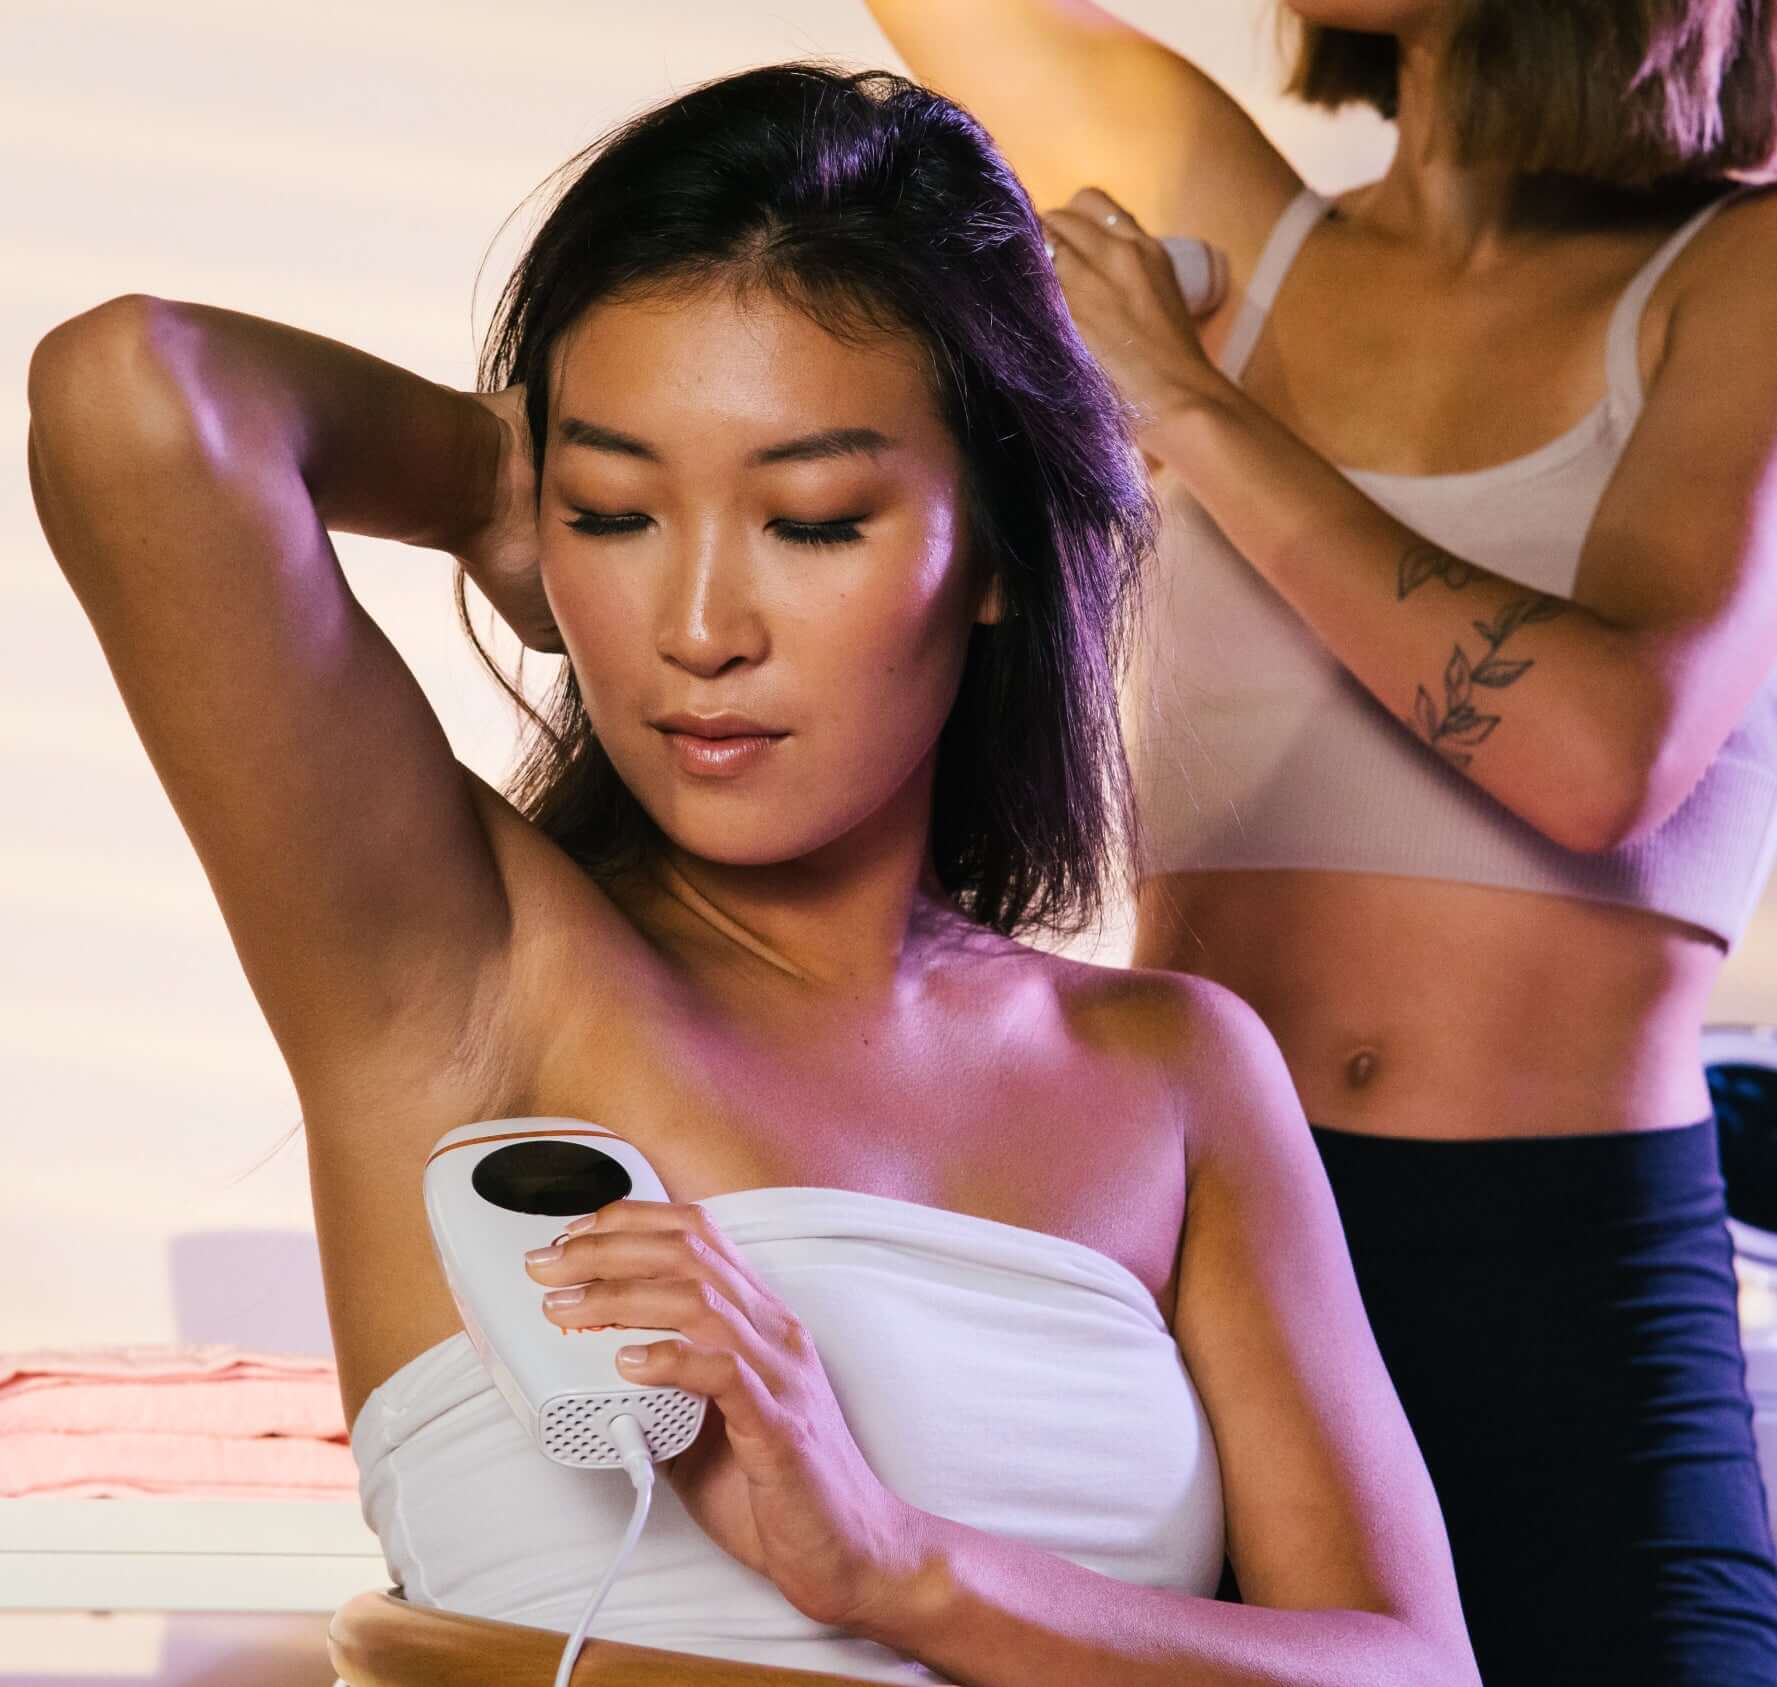 A woman is using a laser hair removal device to get rid of her armpit hair.